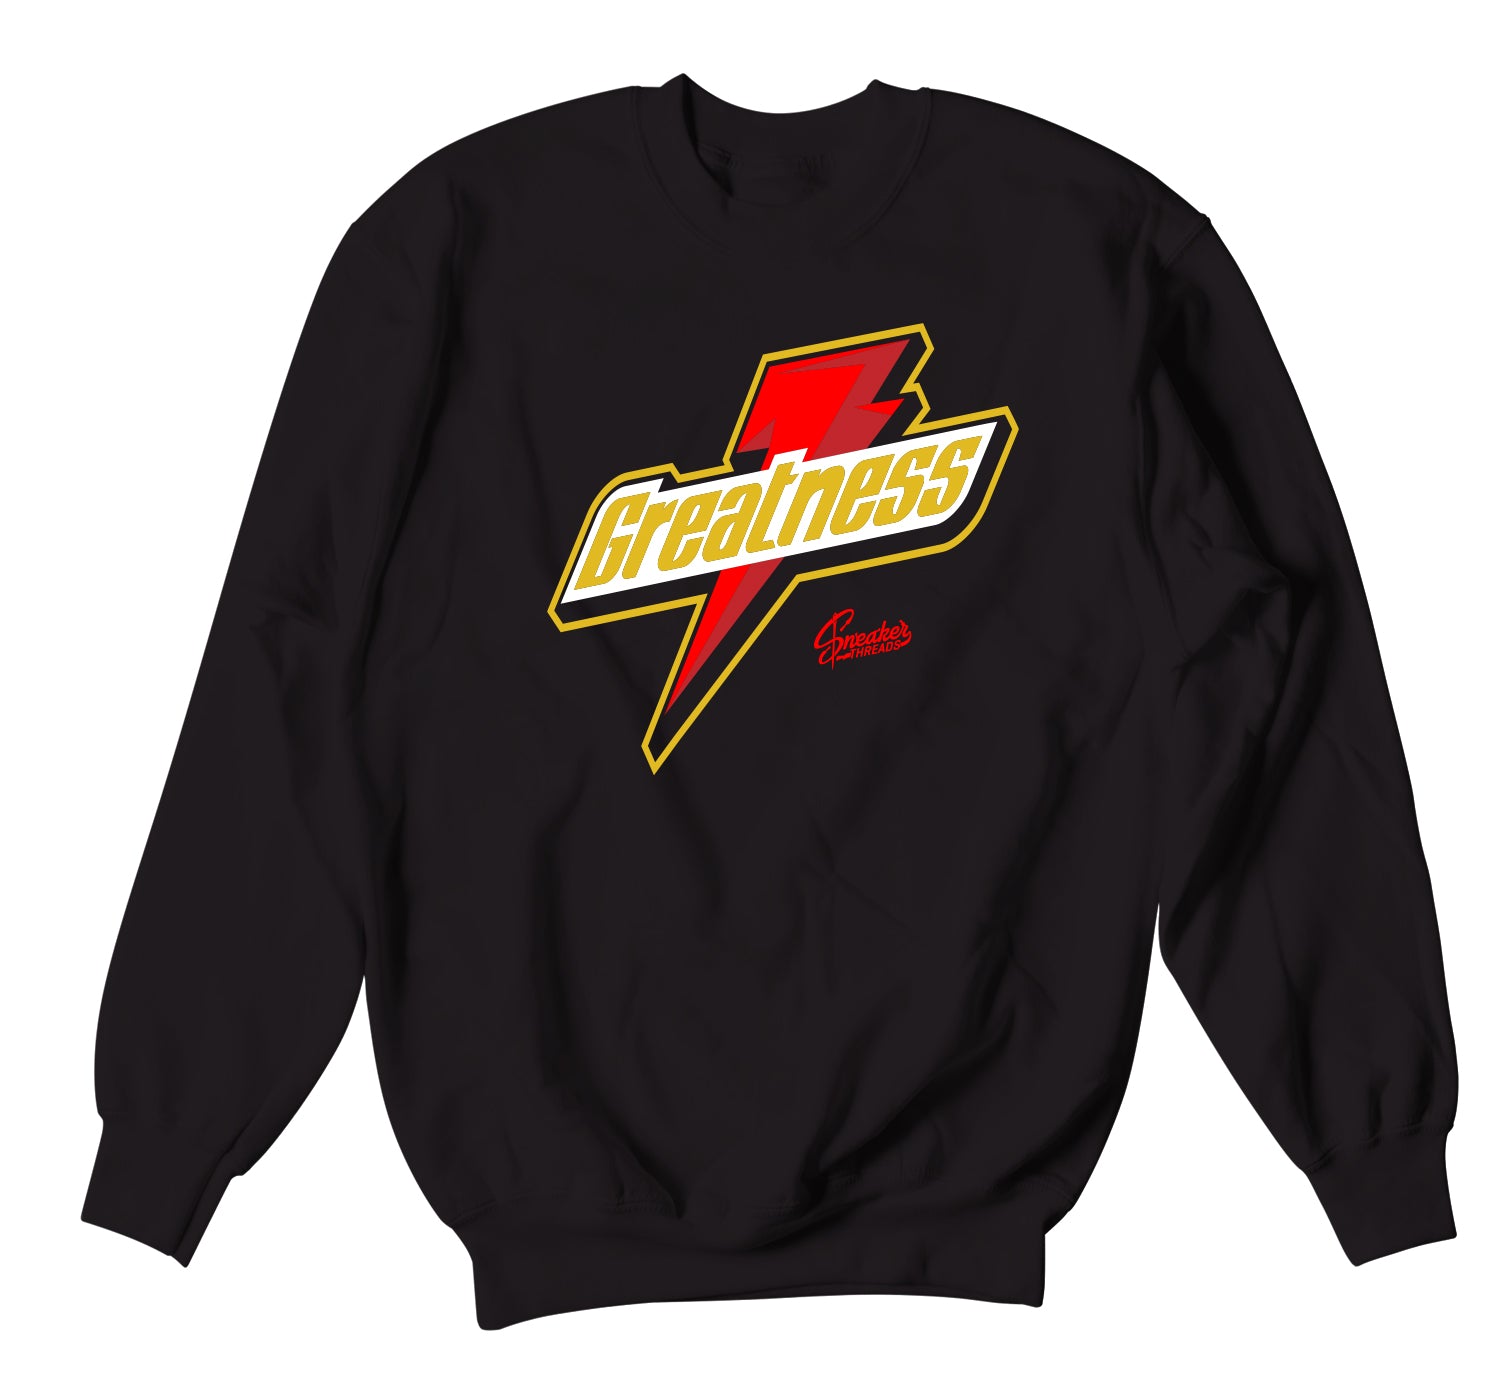 All Star 2020 Trophies Sweater  - Greatness - Black